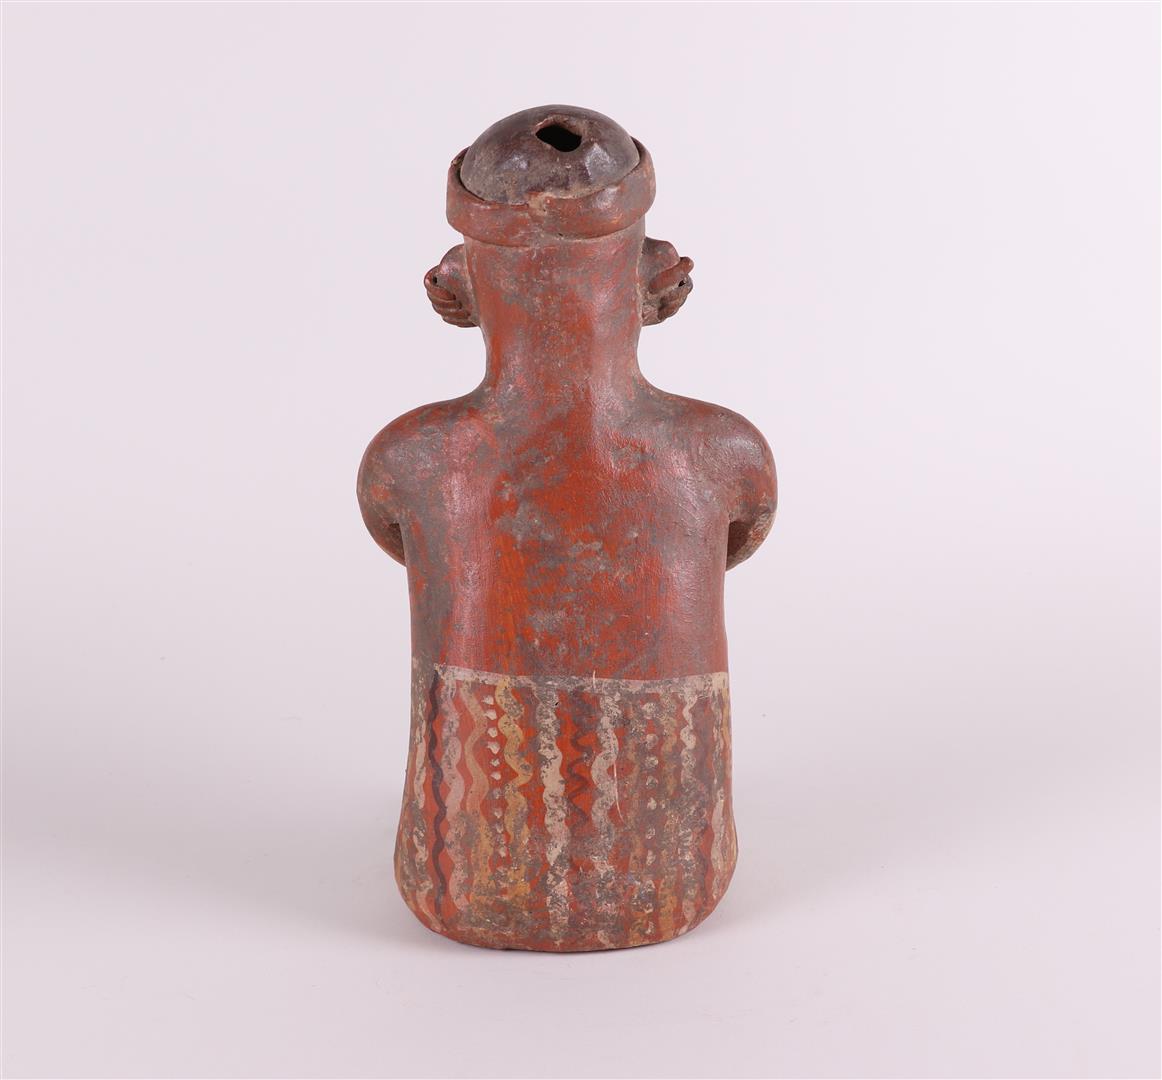 A (possibly) pre-Columbian figure in baked clay. - Image 3 of 6